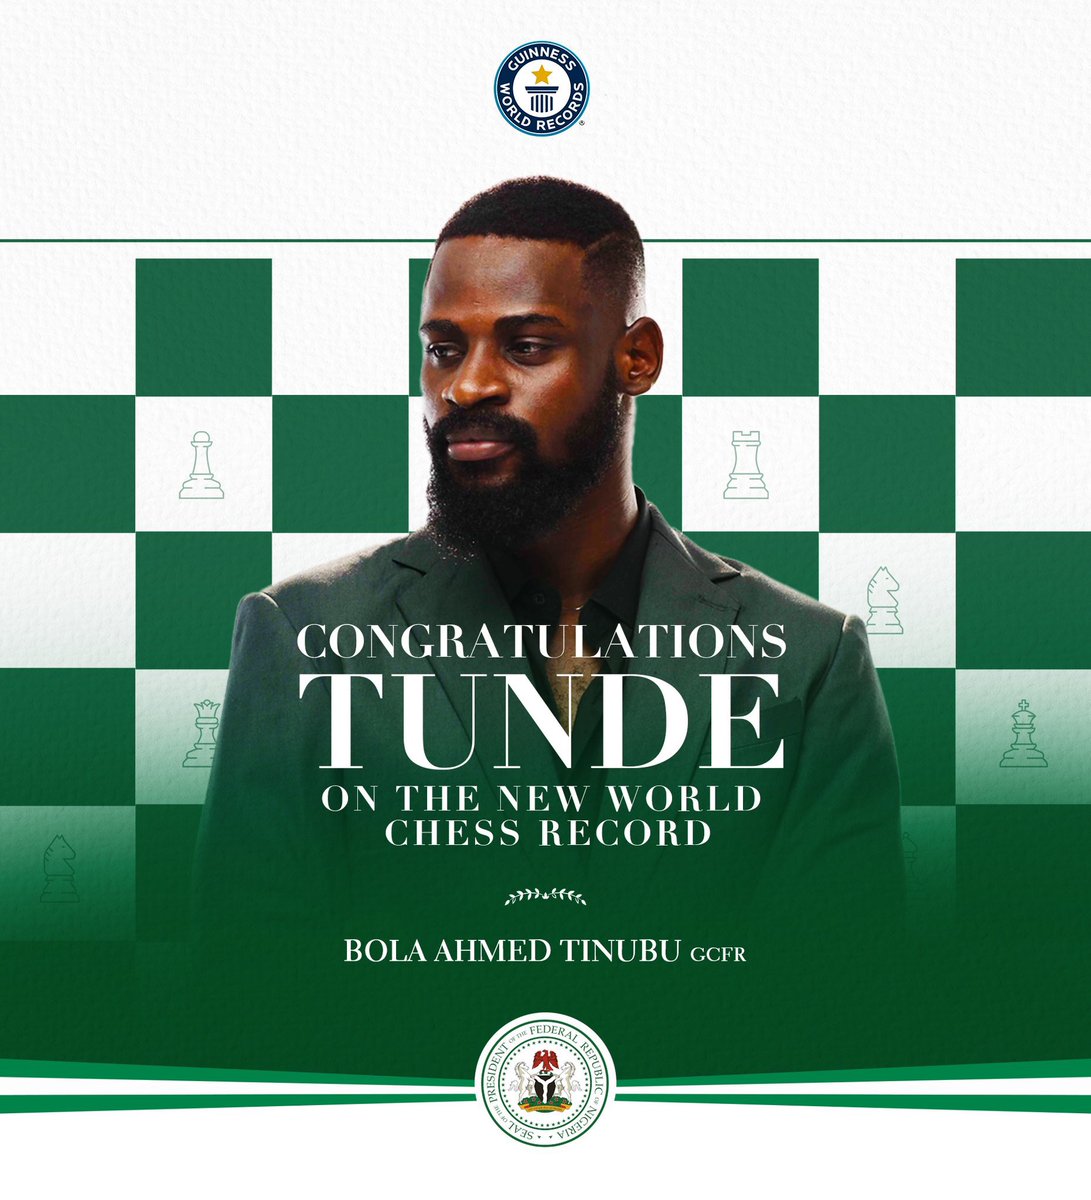 TUNDE has done it 🇳🇬👏🏾 He just set a new world record by playing chess for 58 hrs straight to raise $1M for the school fees of underprivileged kids. In his words, it's possible to achieve great things from a small place. So many lessons we can all learn from his dedication!